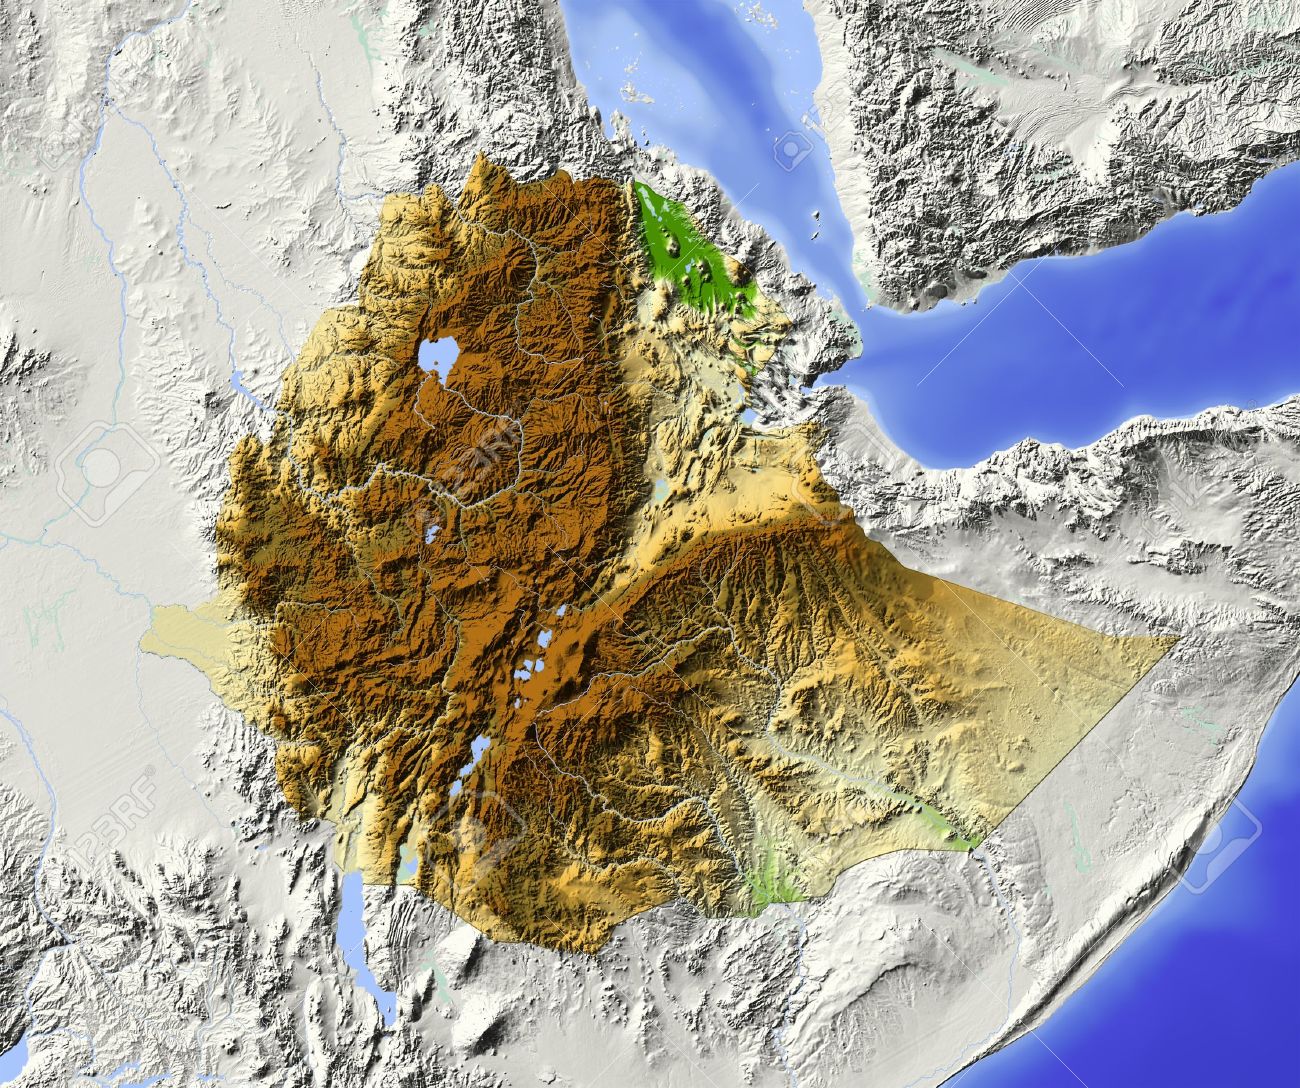 10756512-Ethiopia-Shaded-relief-map-Surrounding-territory-greyed-out-Colored-according-to-elevation-Includes--Stock-Photo.jpg